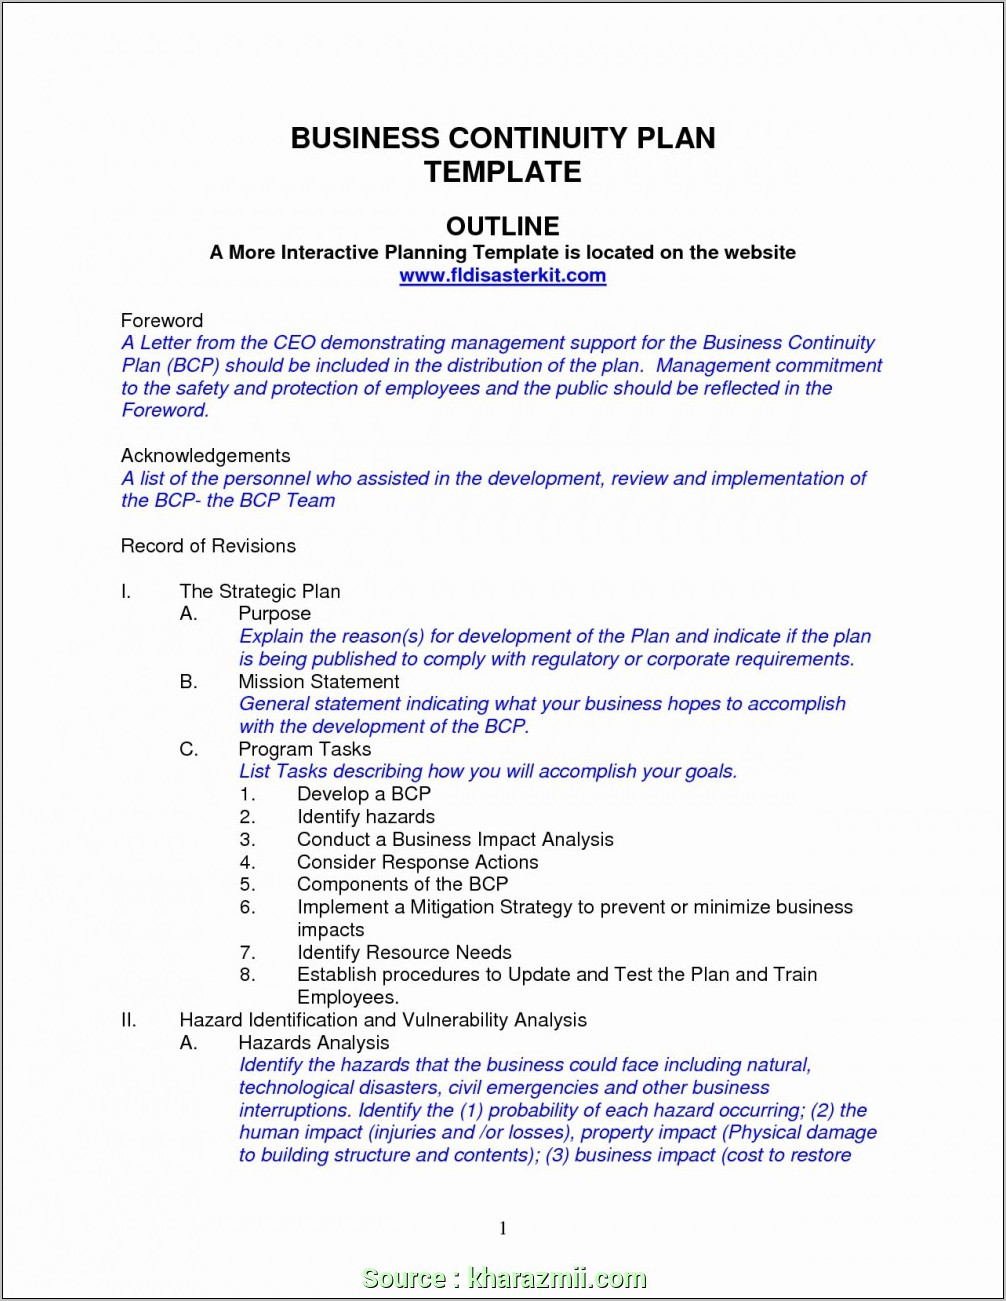 Business Continuity Plan Template For Banks